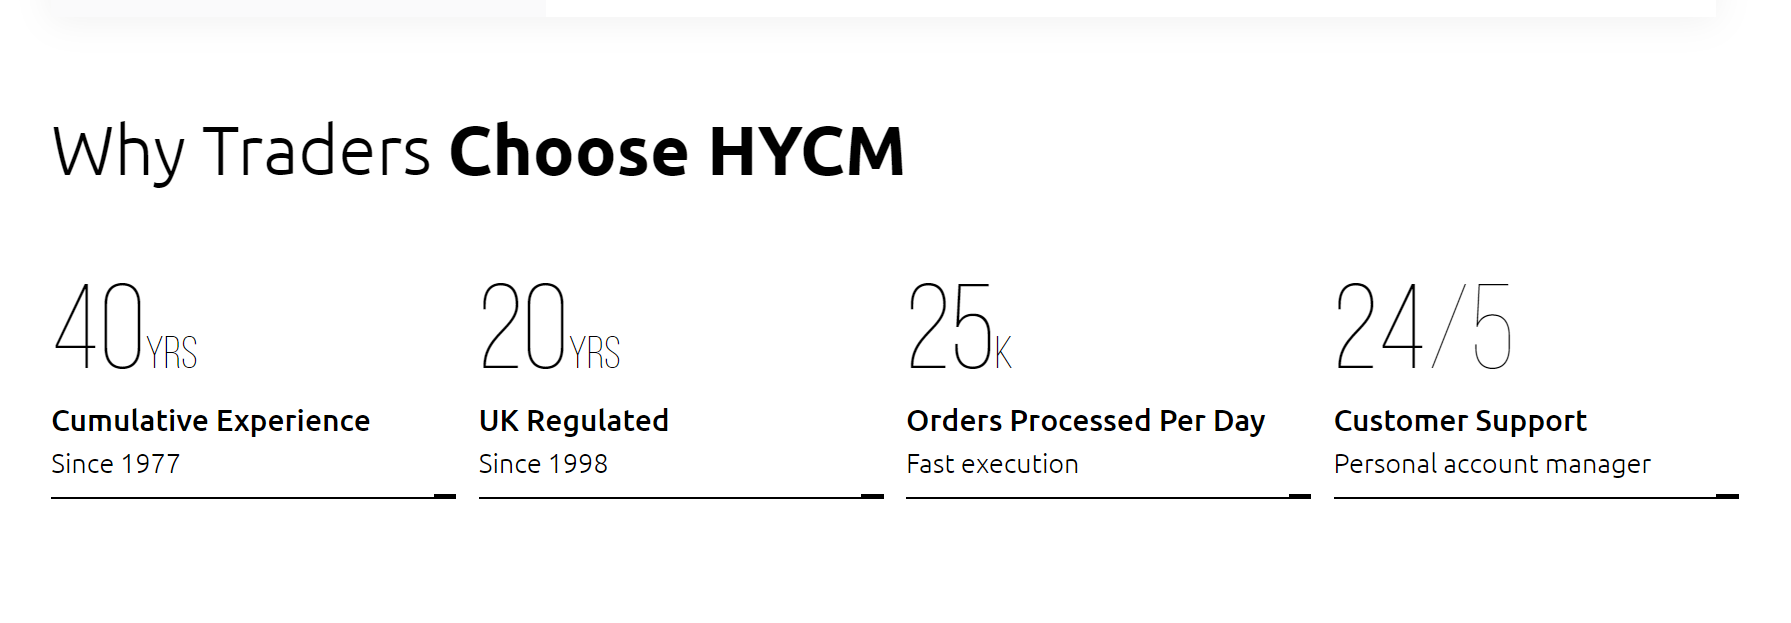 HYCM_overview